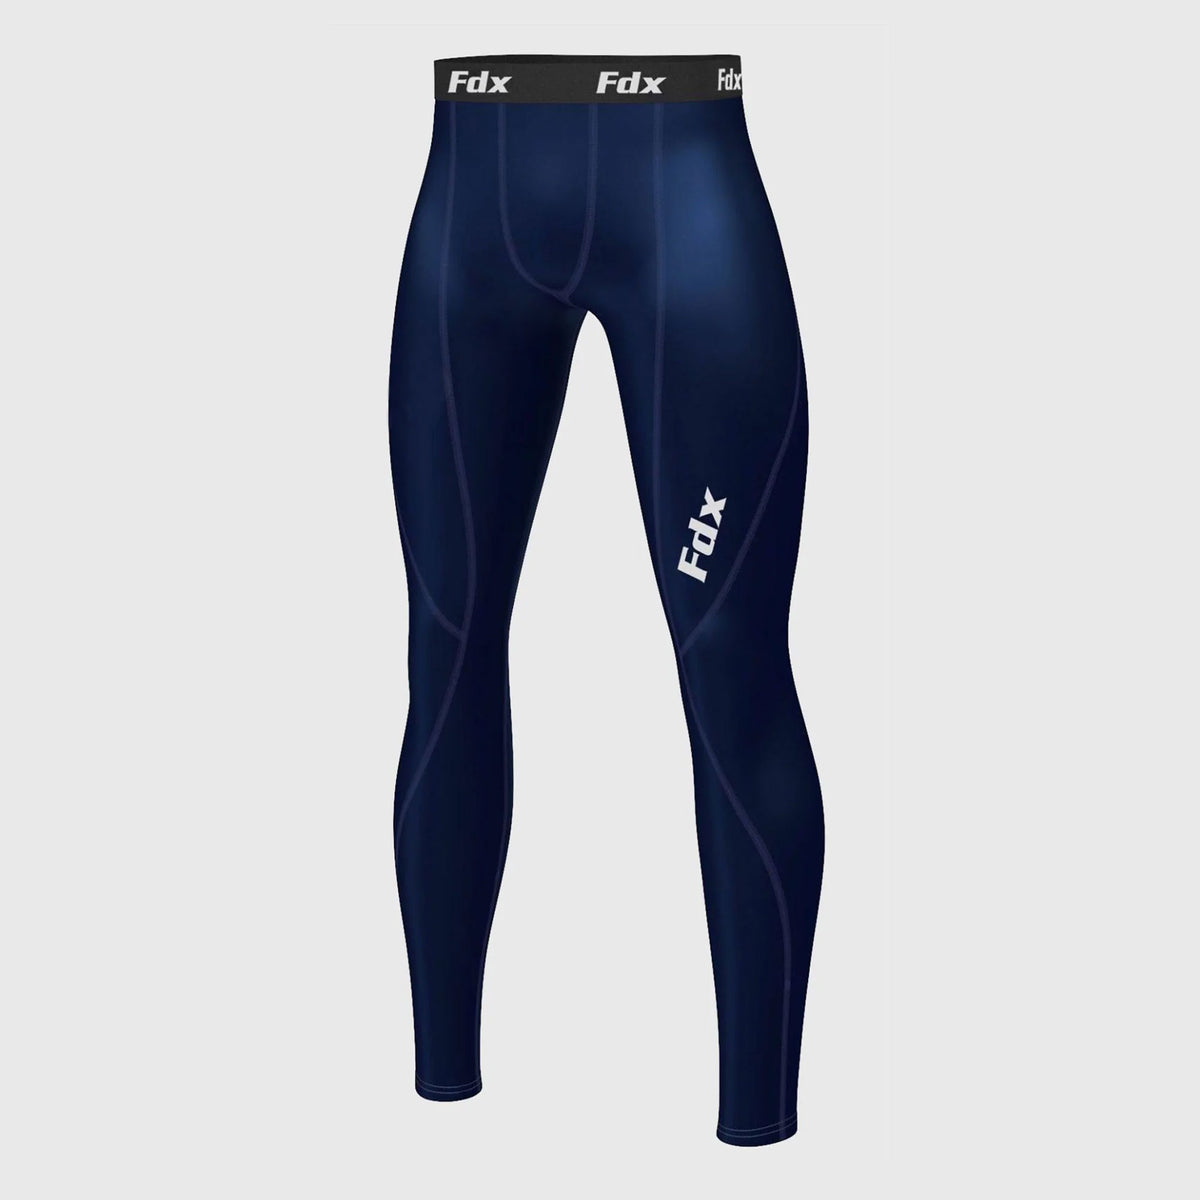 Fdx Viper Men's Padded Winter Cycling Tights Red & Blue